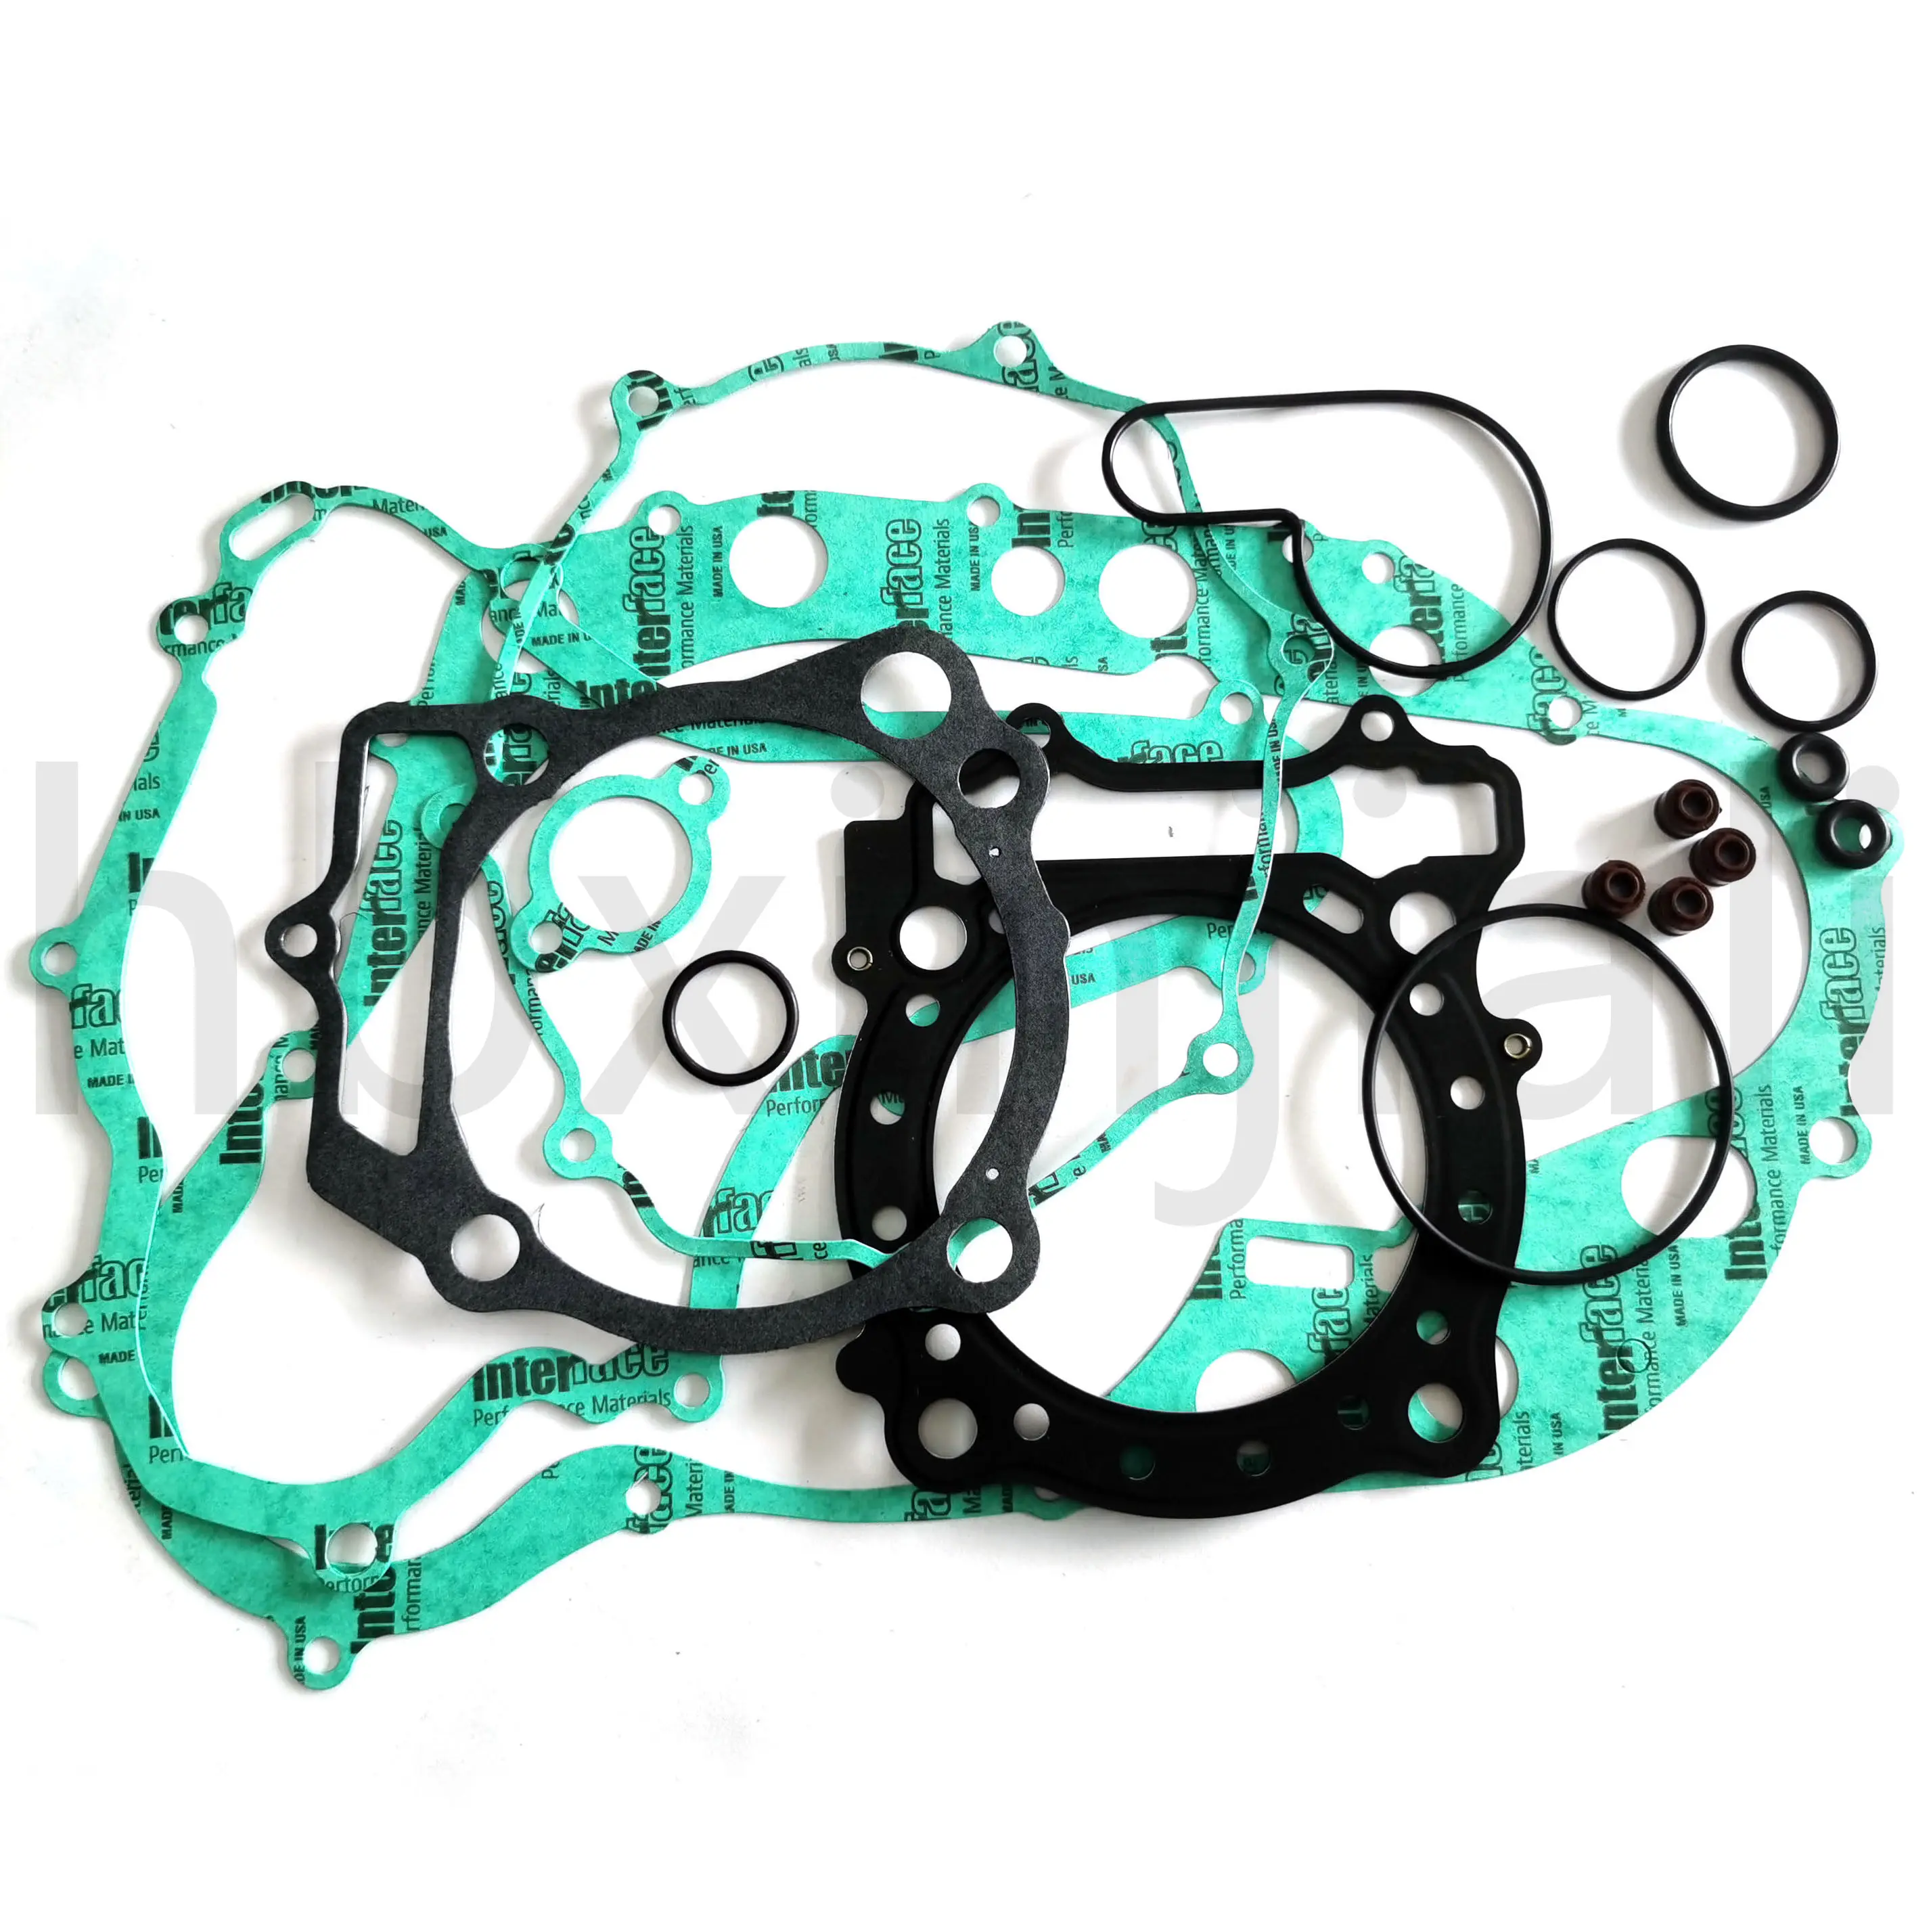 Motorcycles Parts China Customized Motor Engine Rebuild Replacement Top Set Complete Full Gasket Kit For ATV UTV LTR450